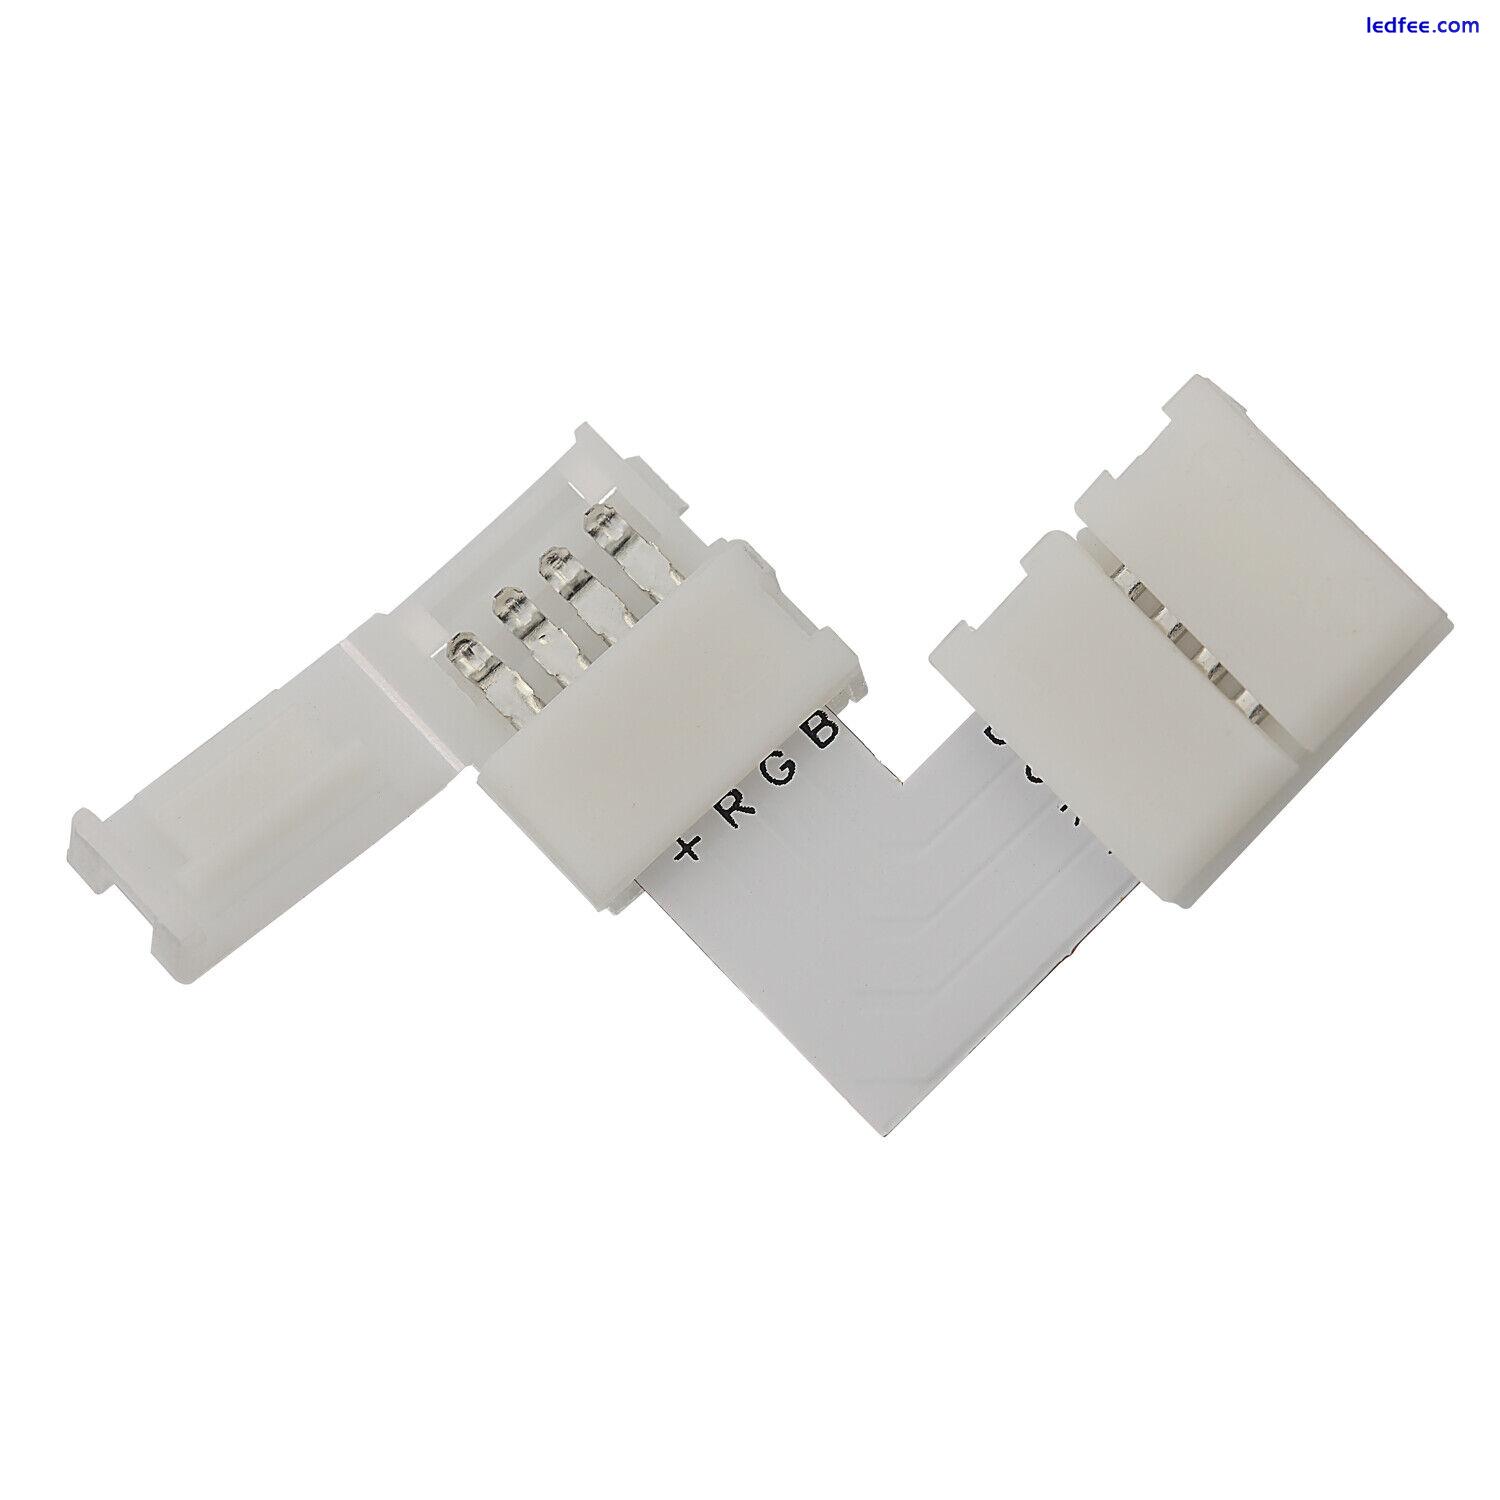  4 Pins Corner L Shape Clip Adapter Connector for 5050 3528 RGB LED Strip Light 2 